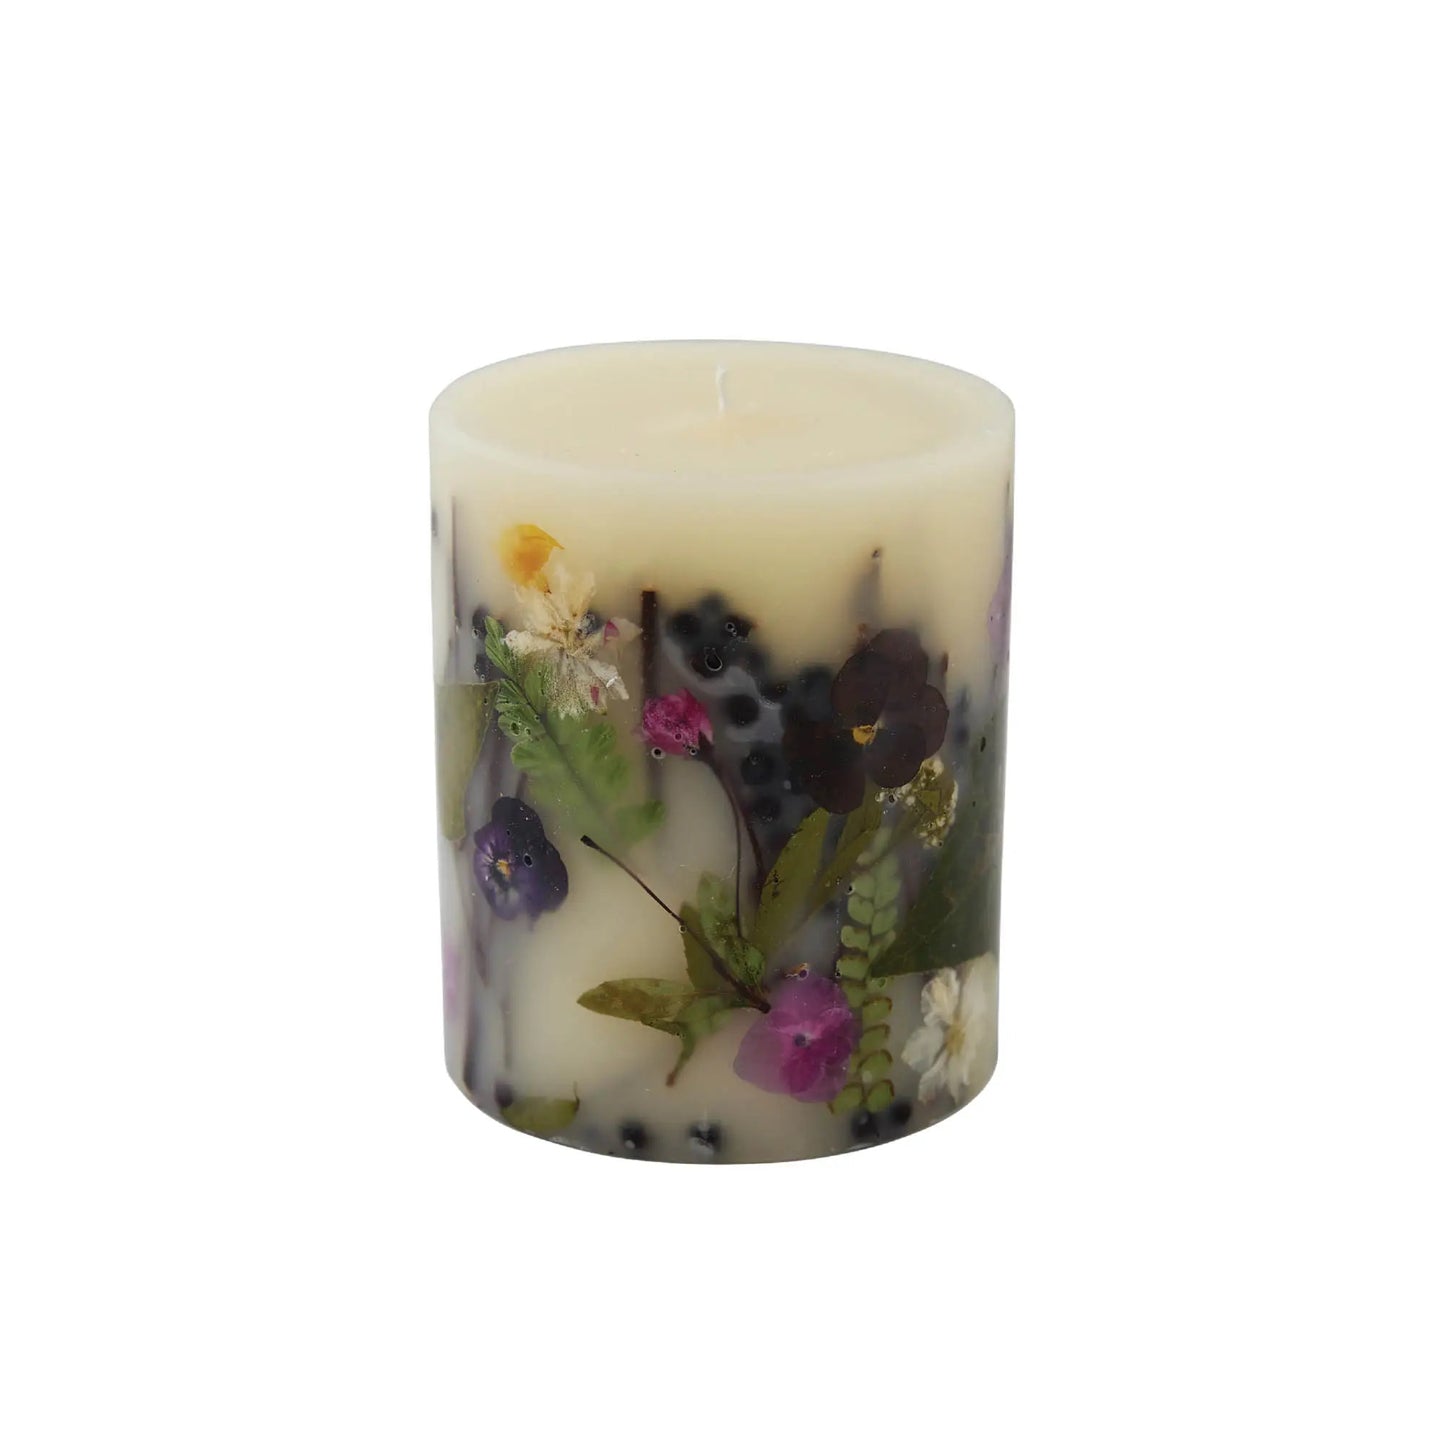 Rosy Rings, Black Currant + Bay Small Round Botanical Candle - Boutique Dandelion